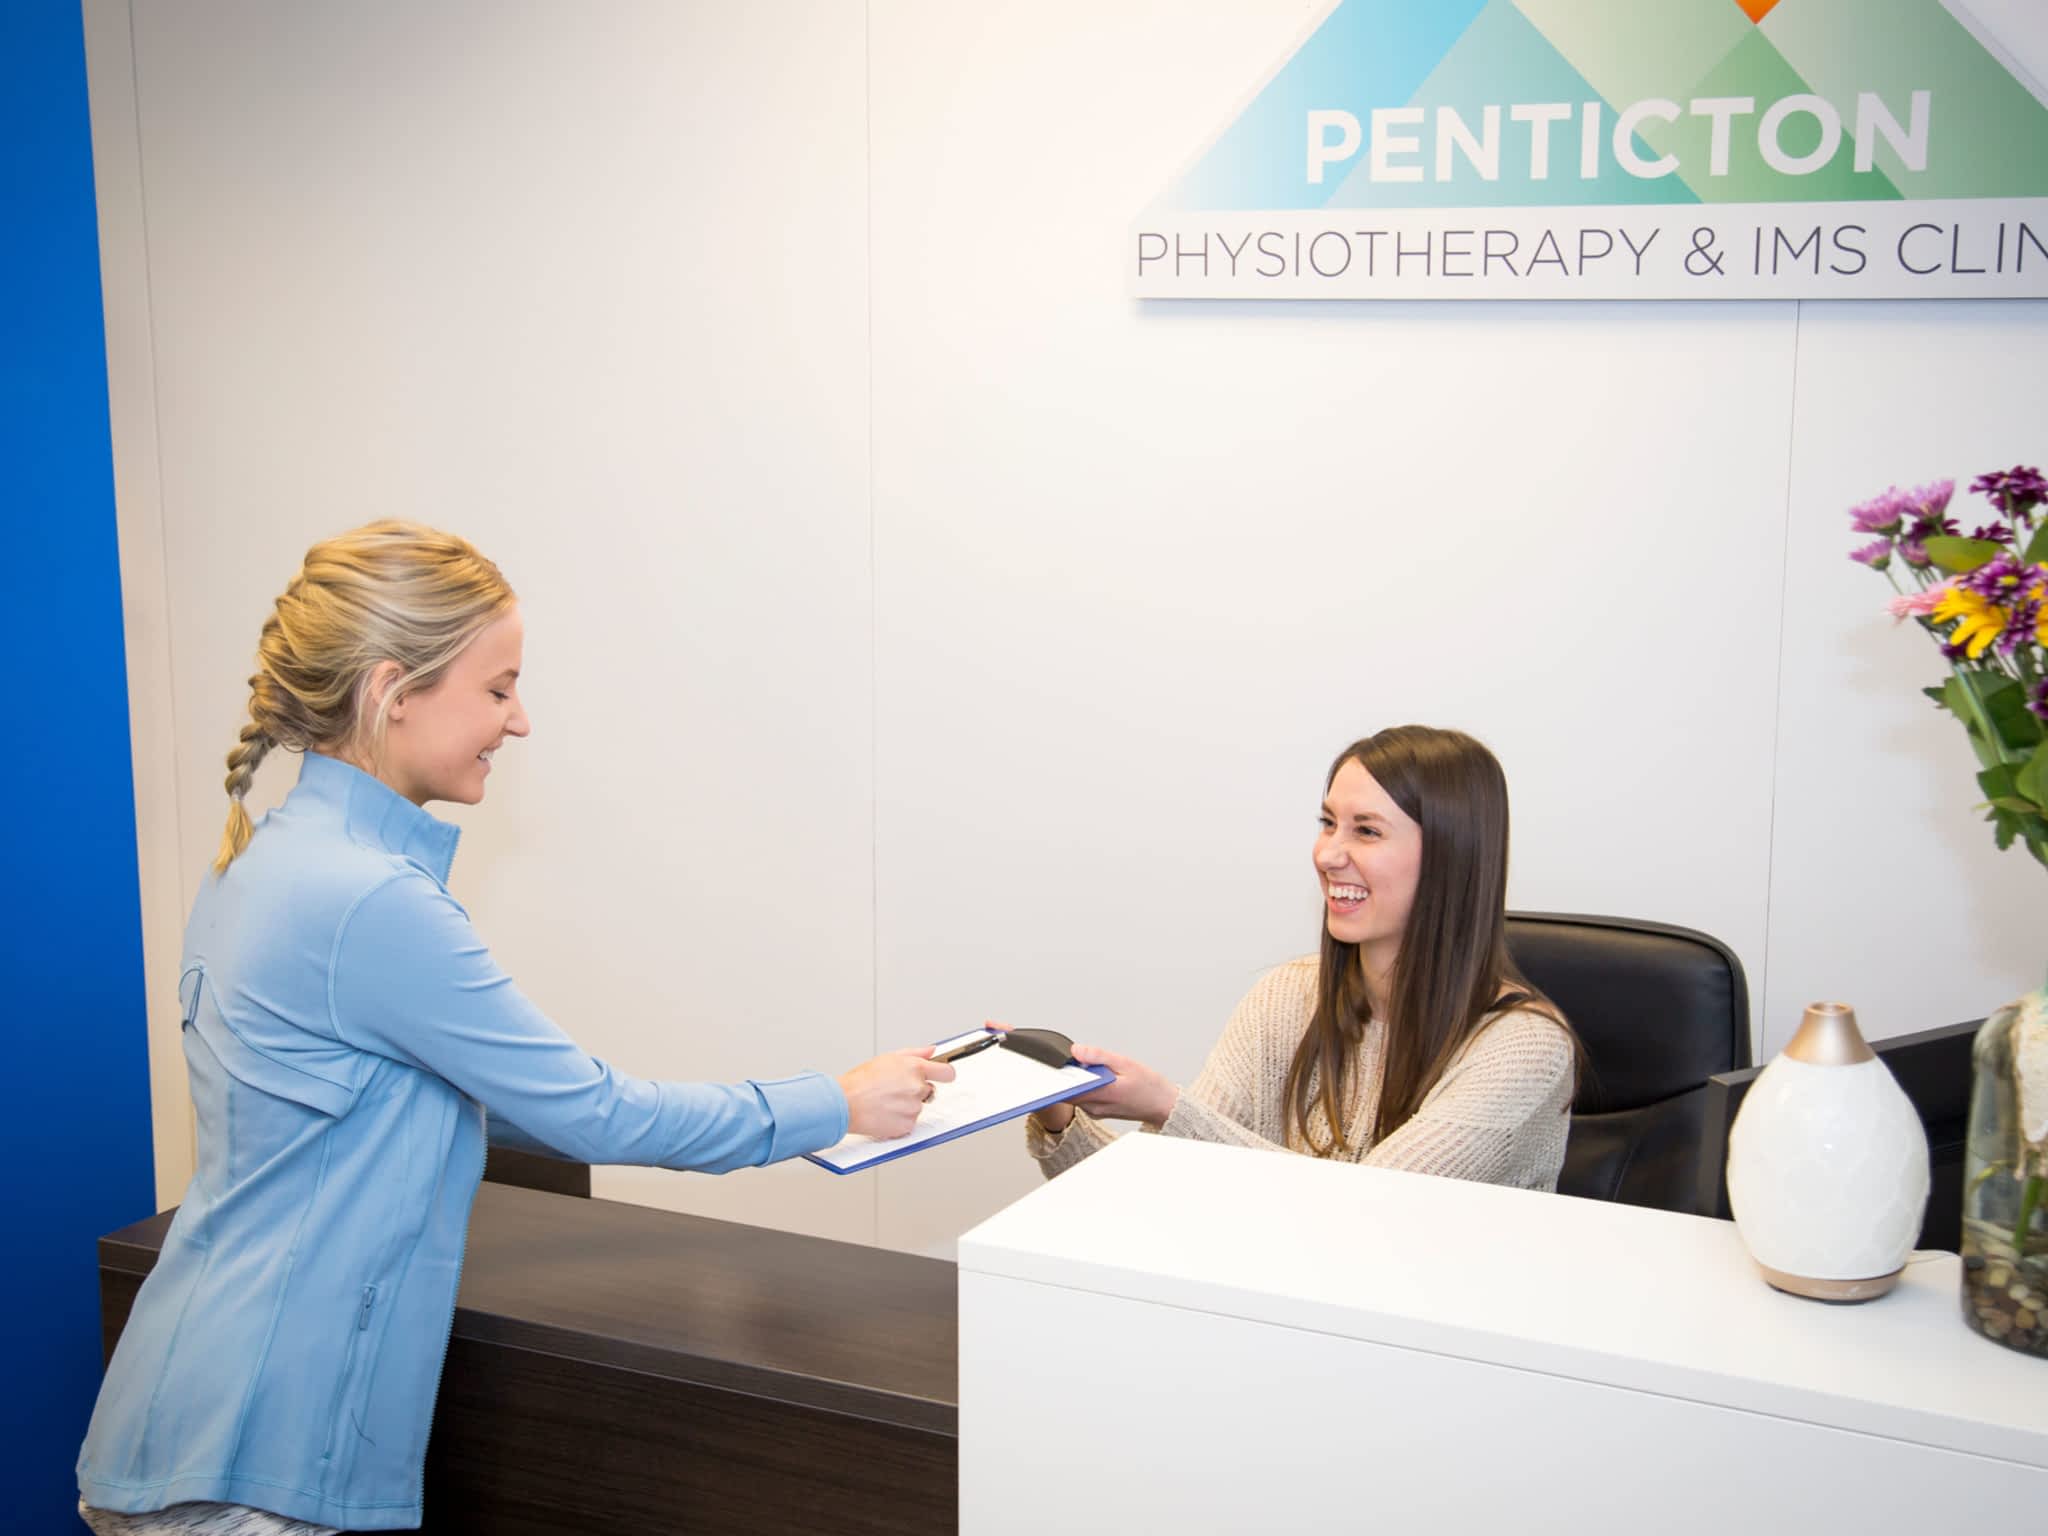 photo Penticton Physiotherapy & IMS Clinic